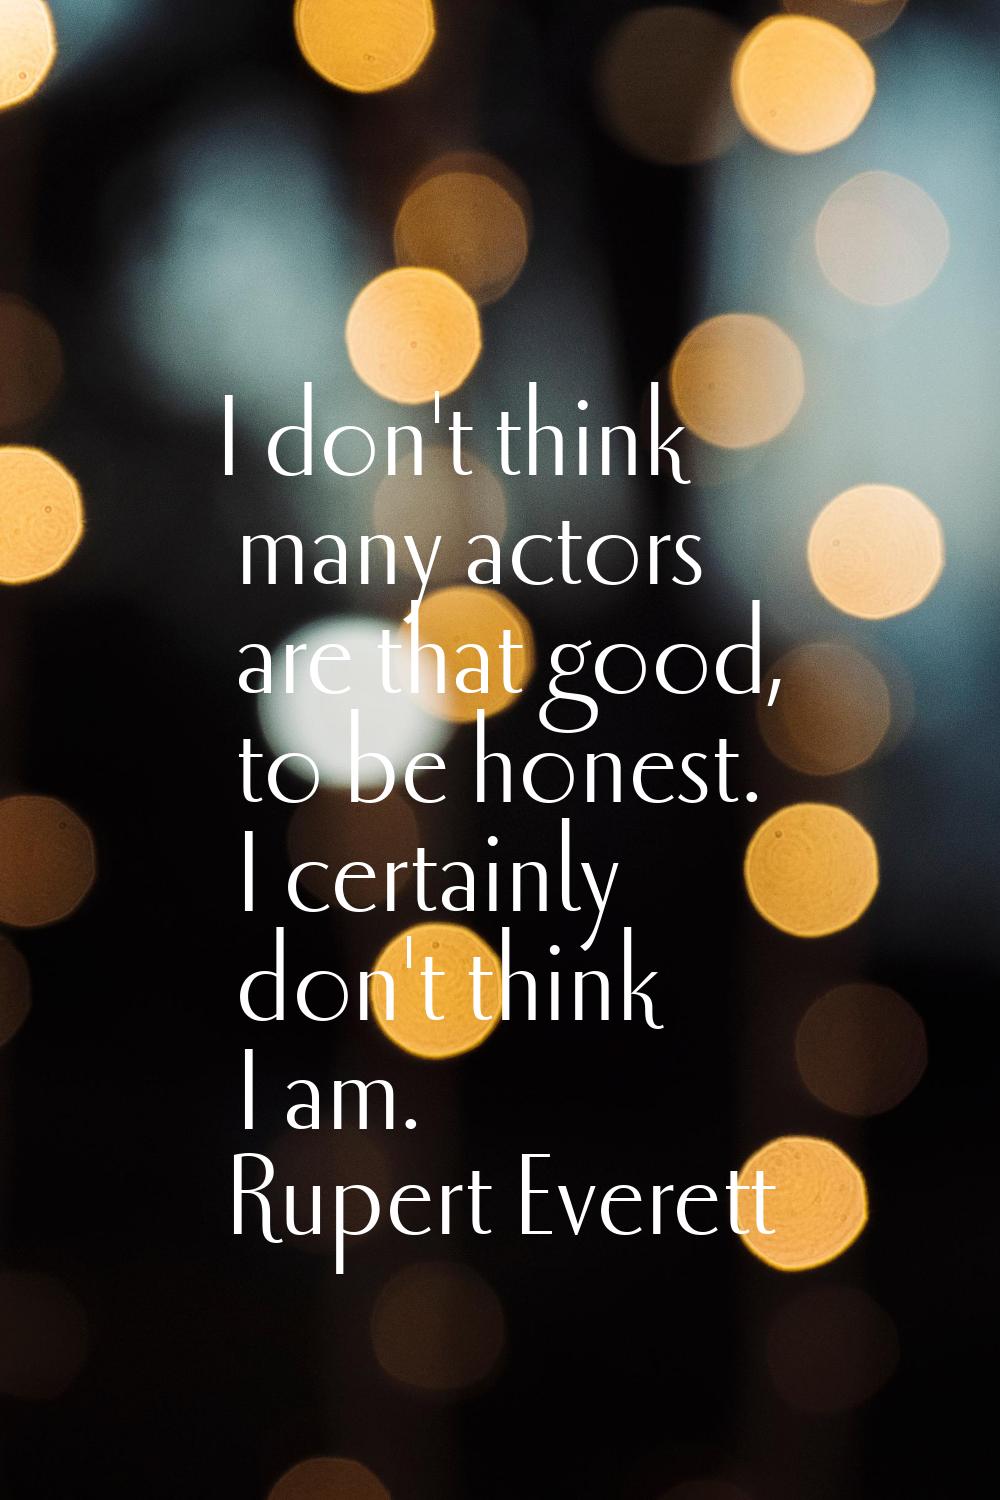 I don't think many actors are that good, to be honest. I certainly don't think I am.